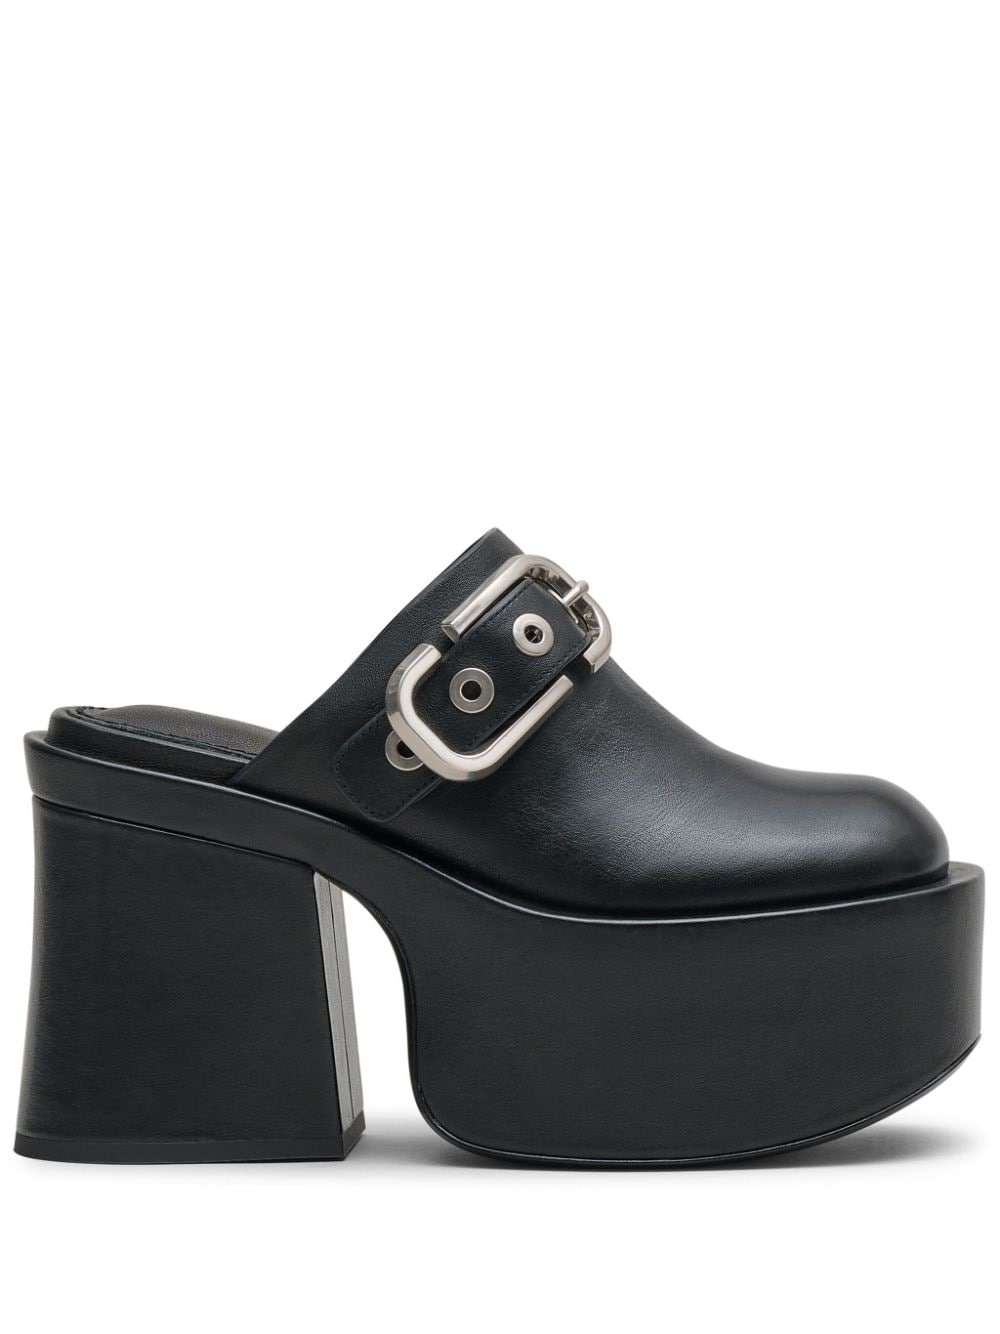 The J Marc leather clogs - 1